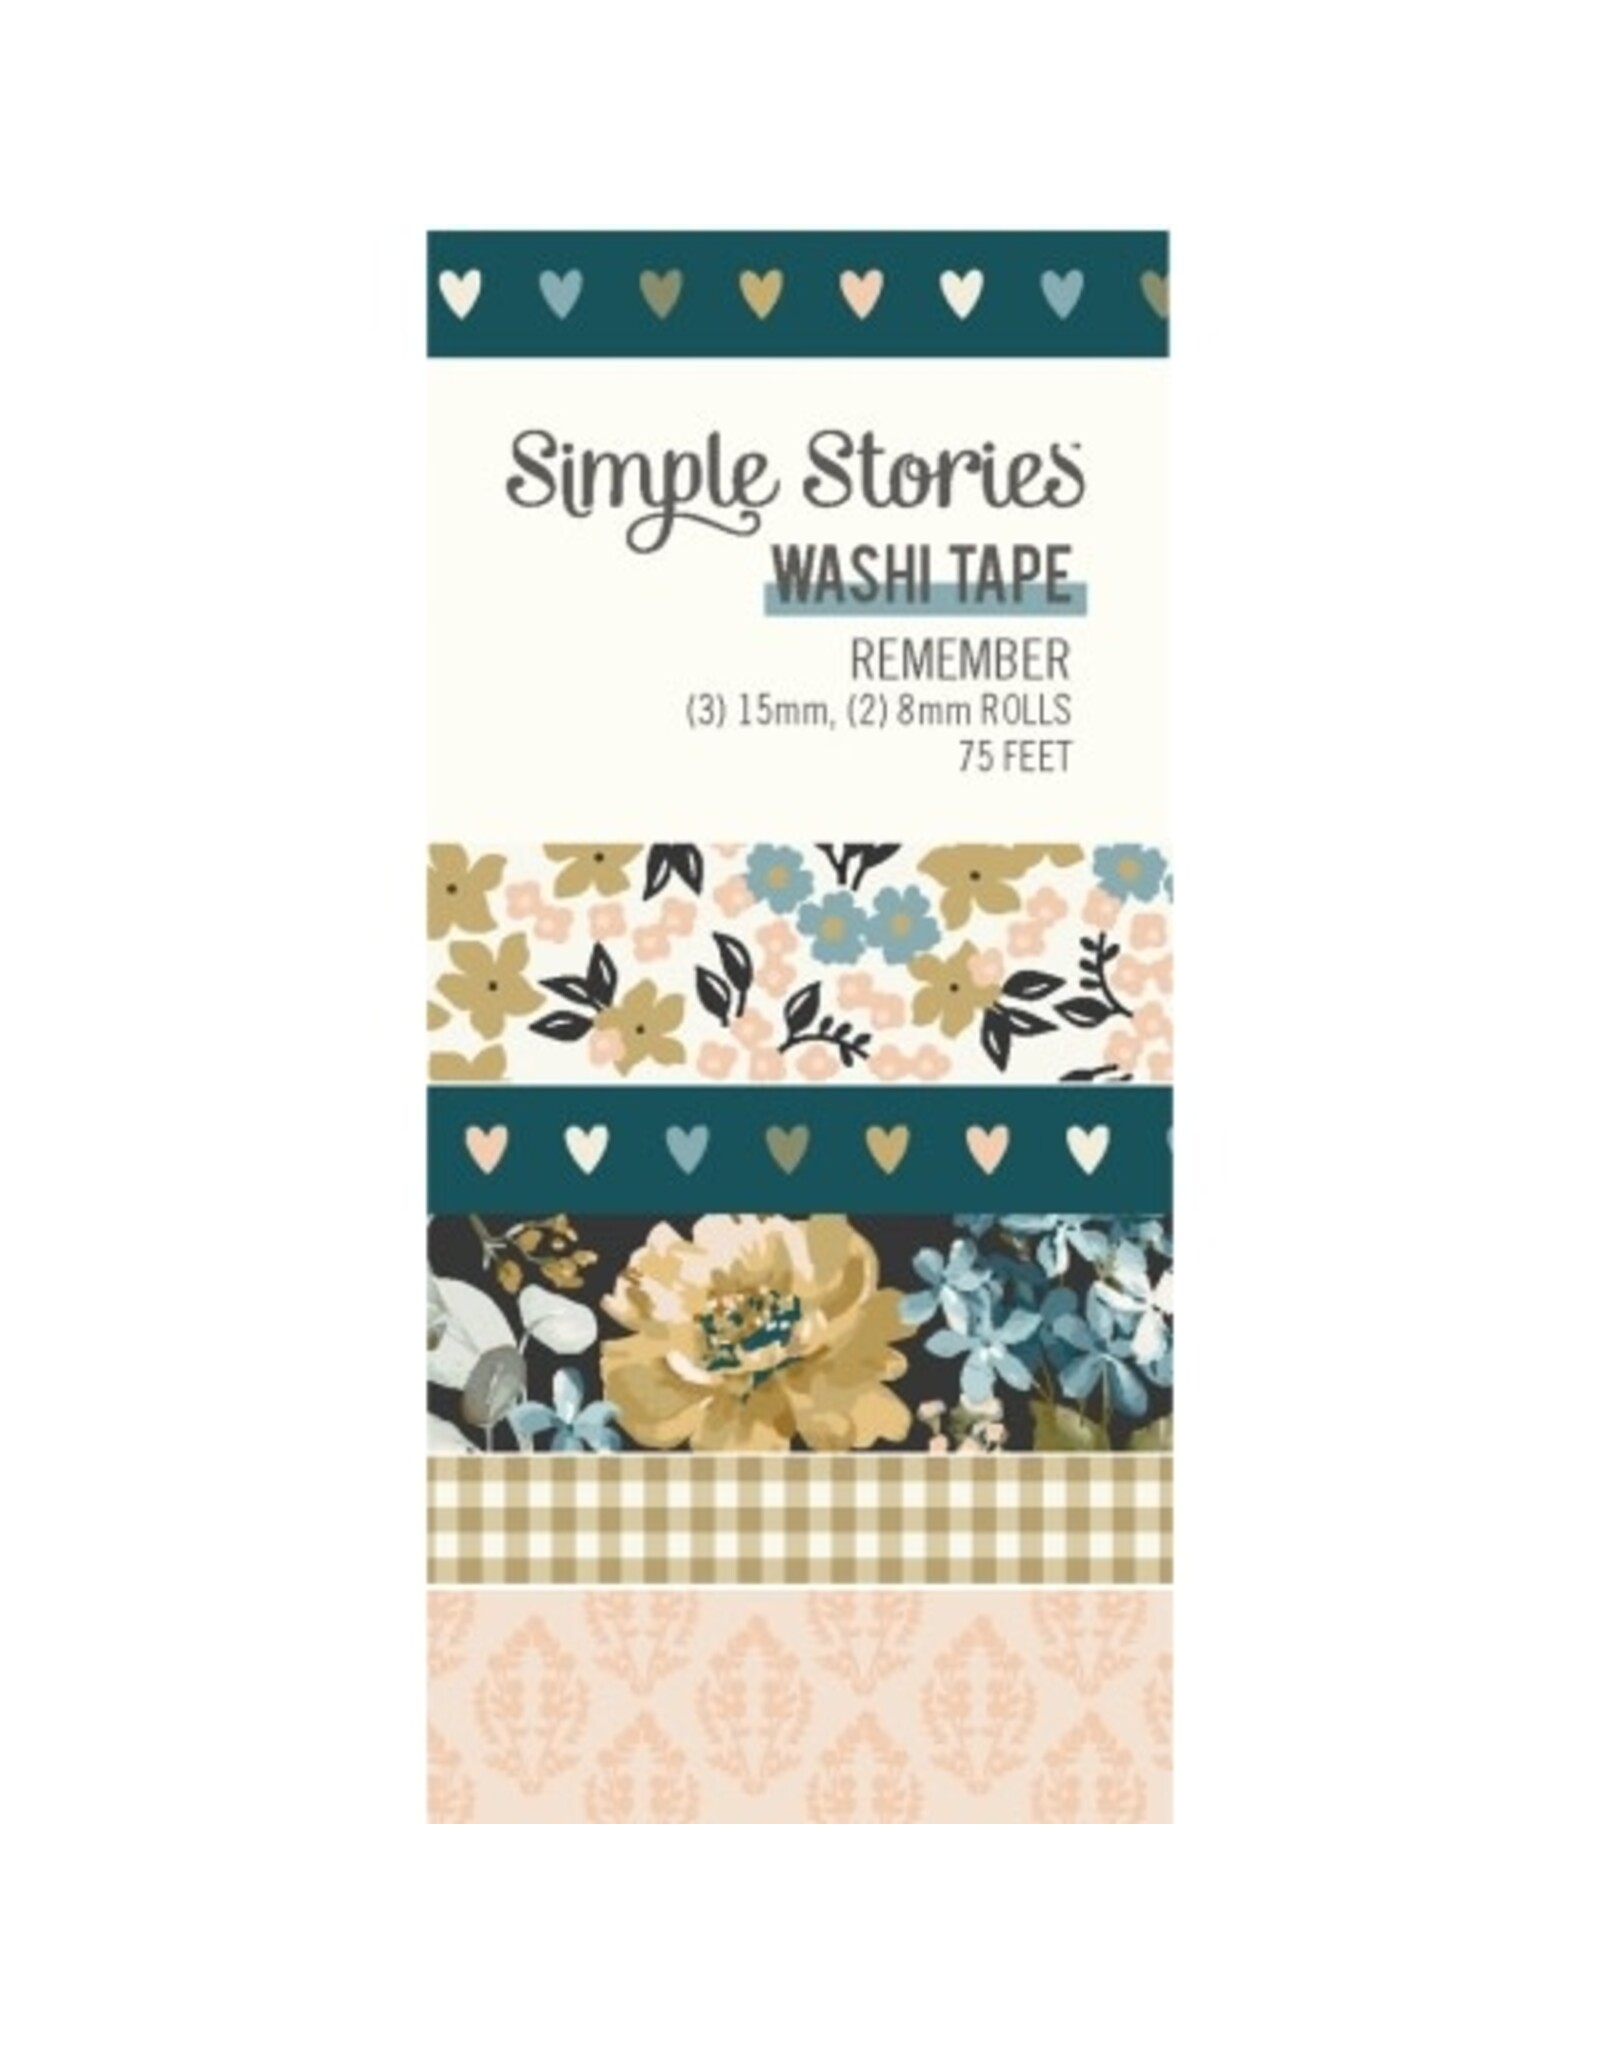 Simple Stories Remember - Washi Tape